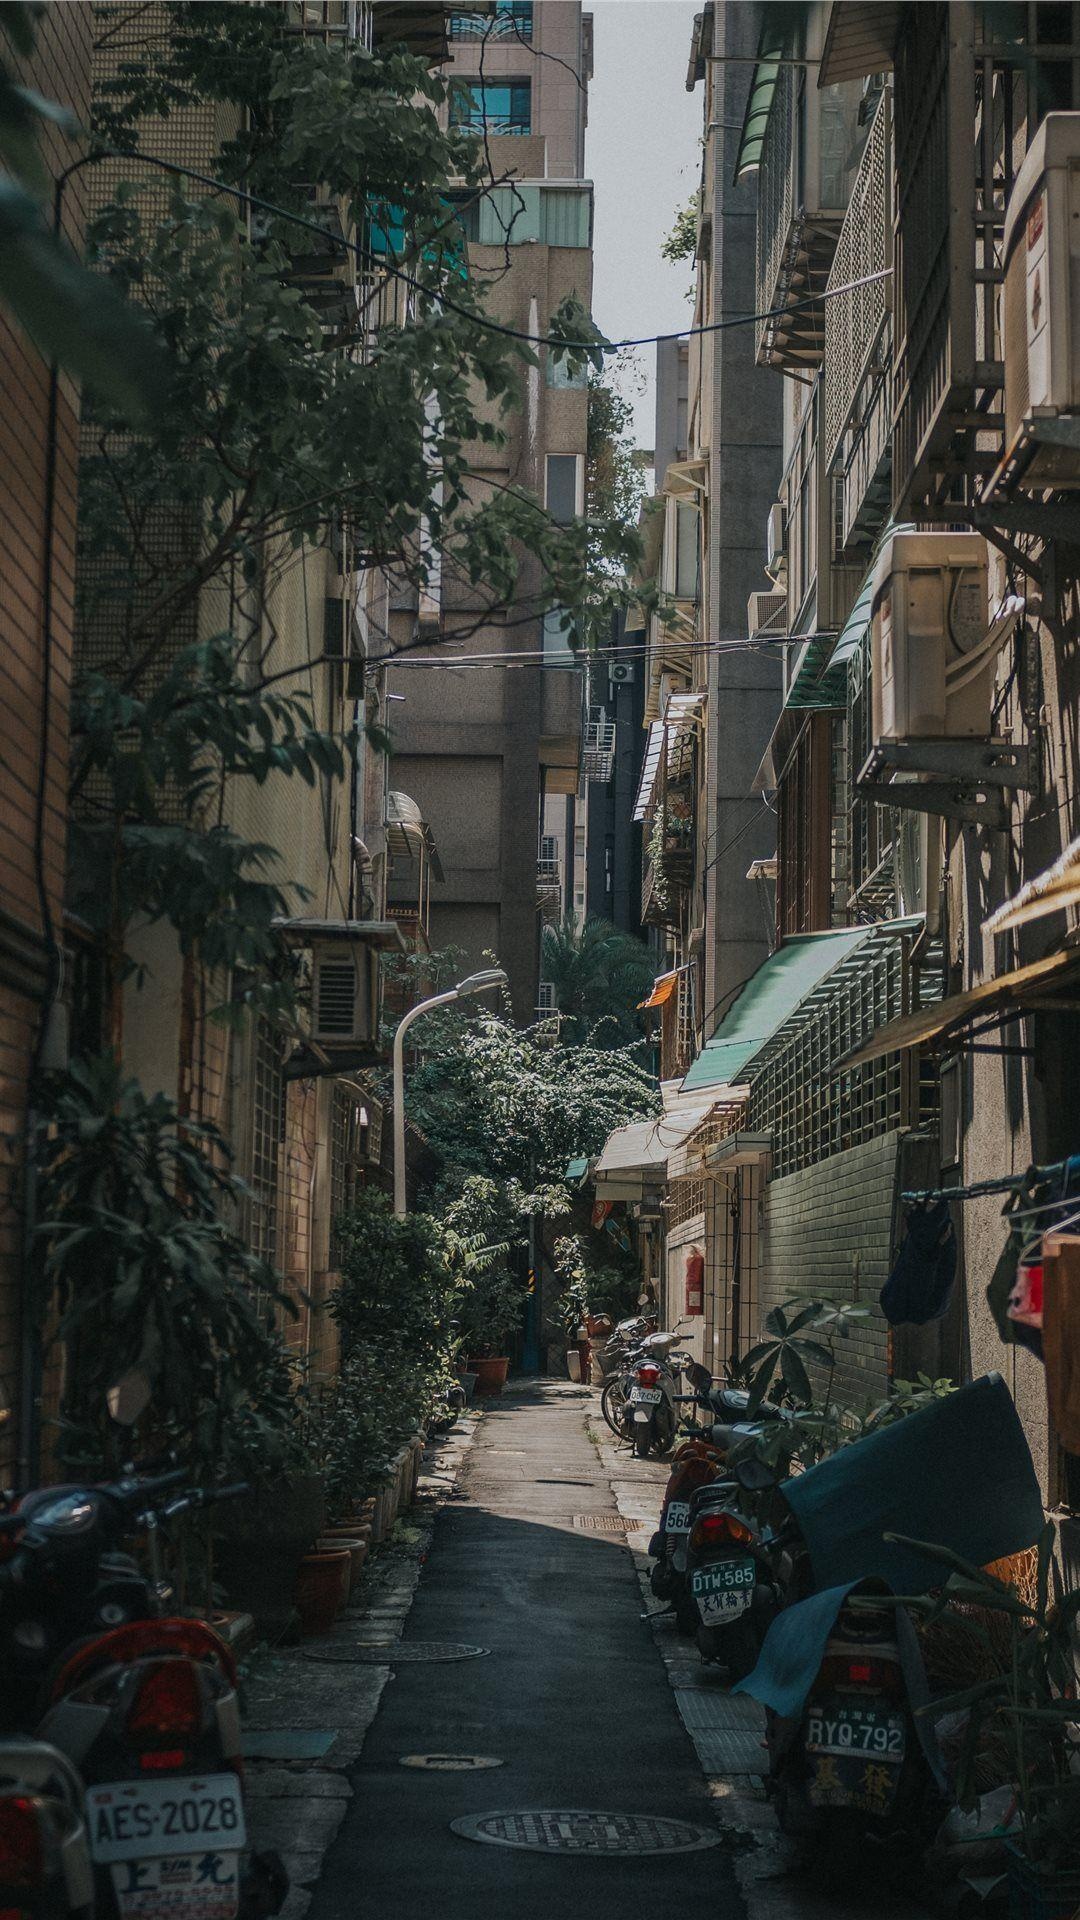 Alley: The very narrow street of a Japanese city, Commuter town, Sidewalk and a road for transport. 1080x1920 Full HD Wallpaper.